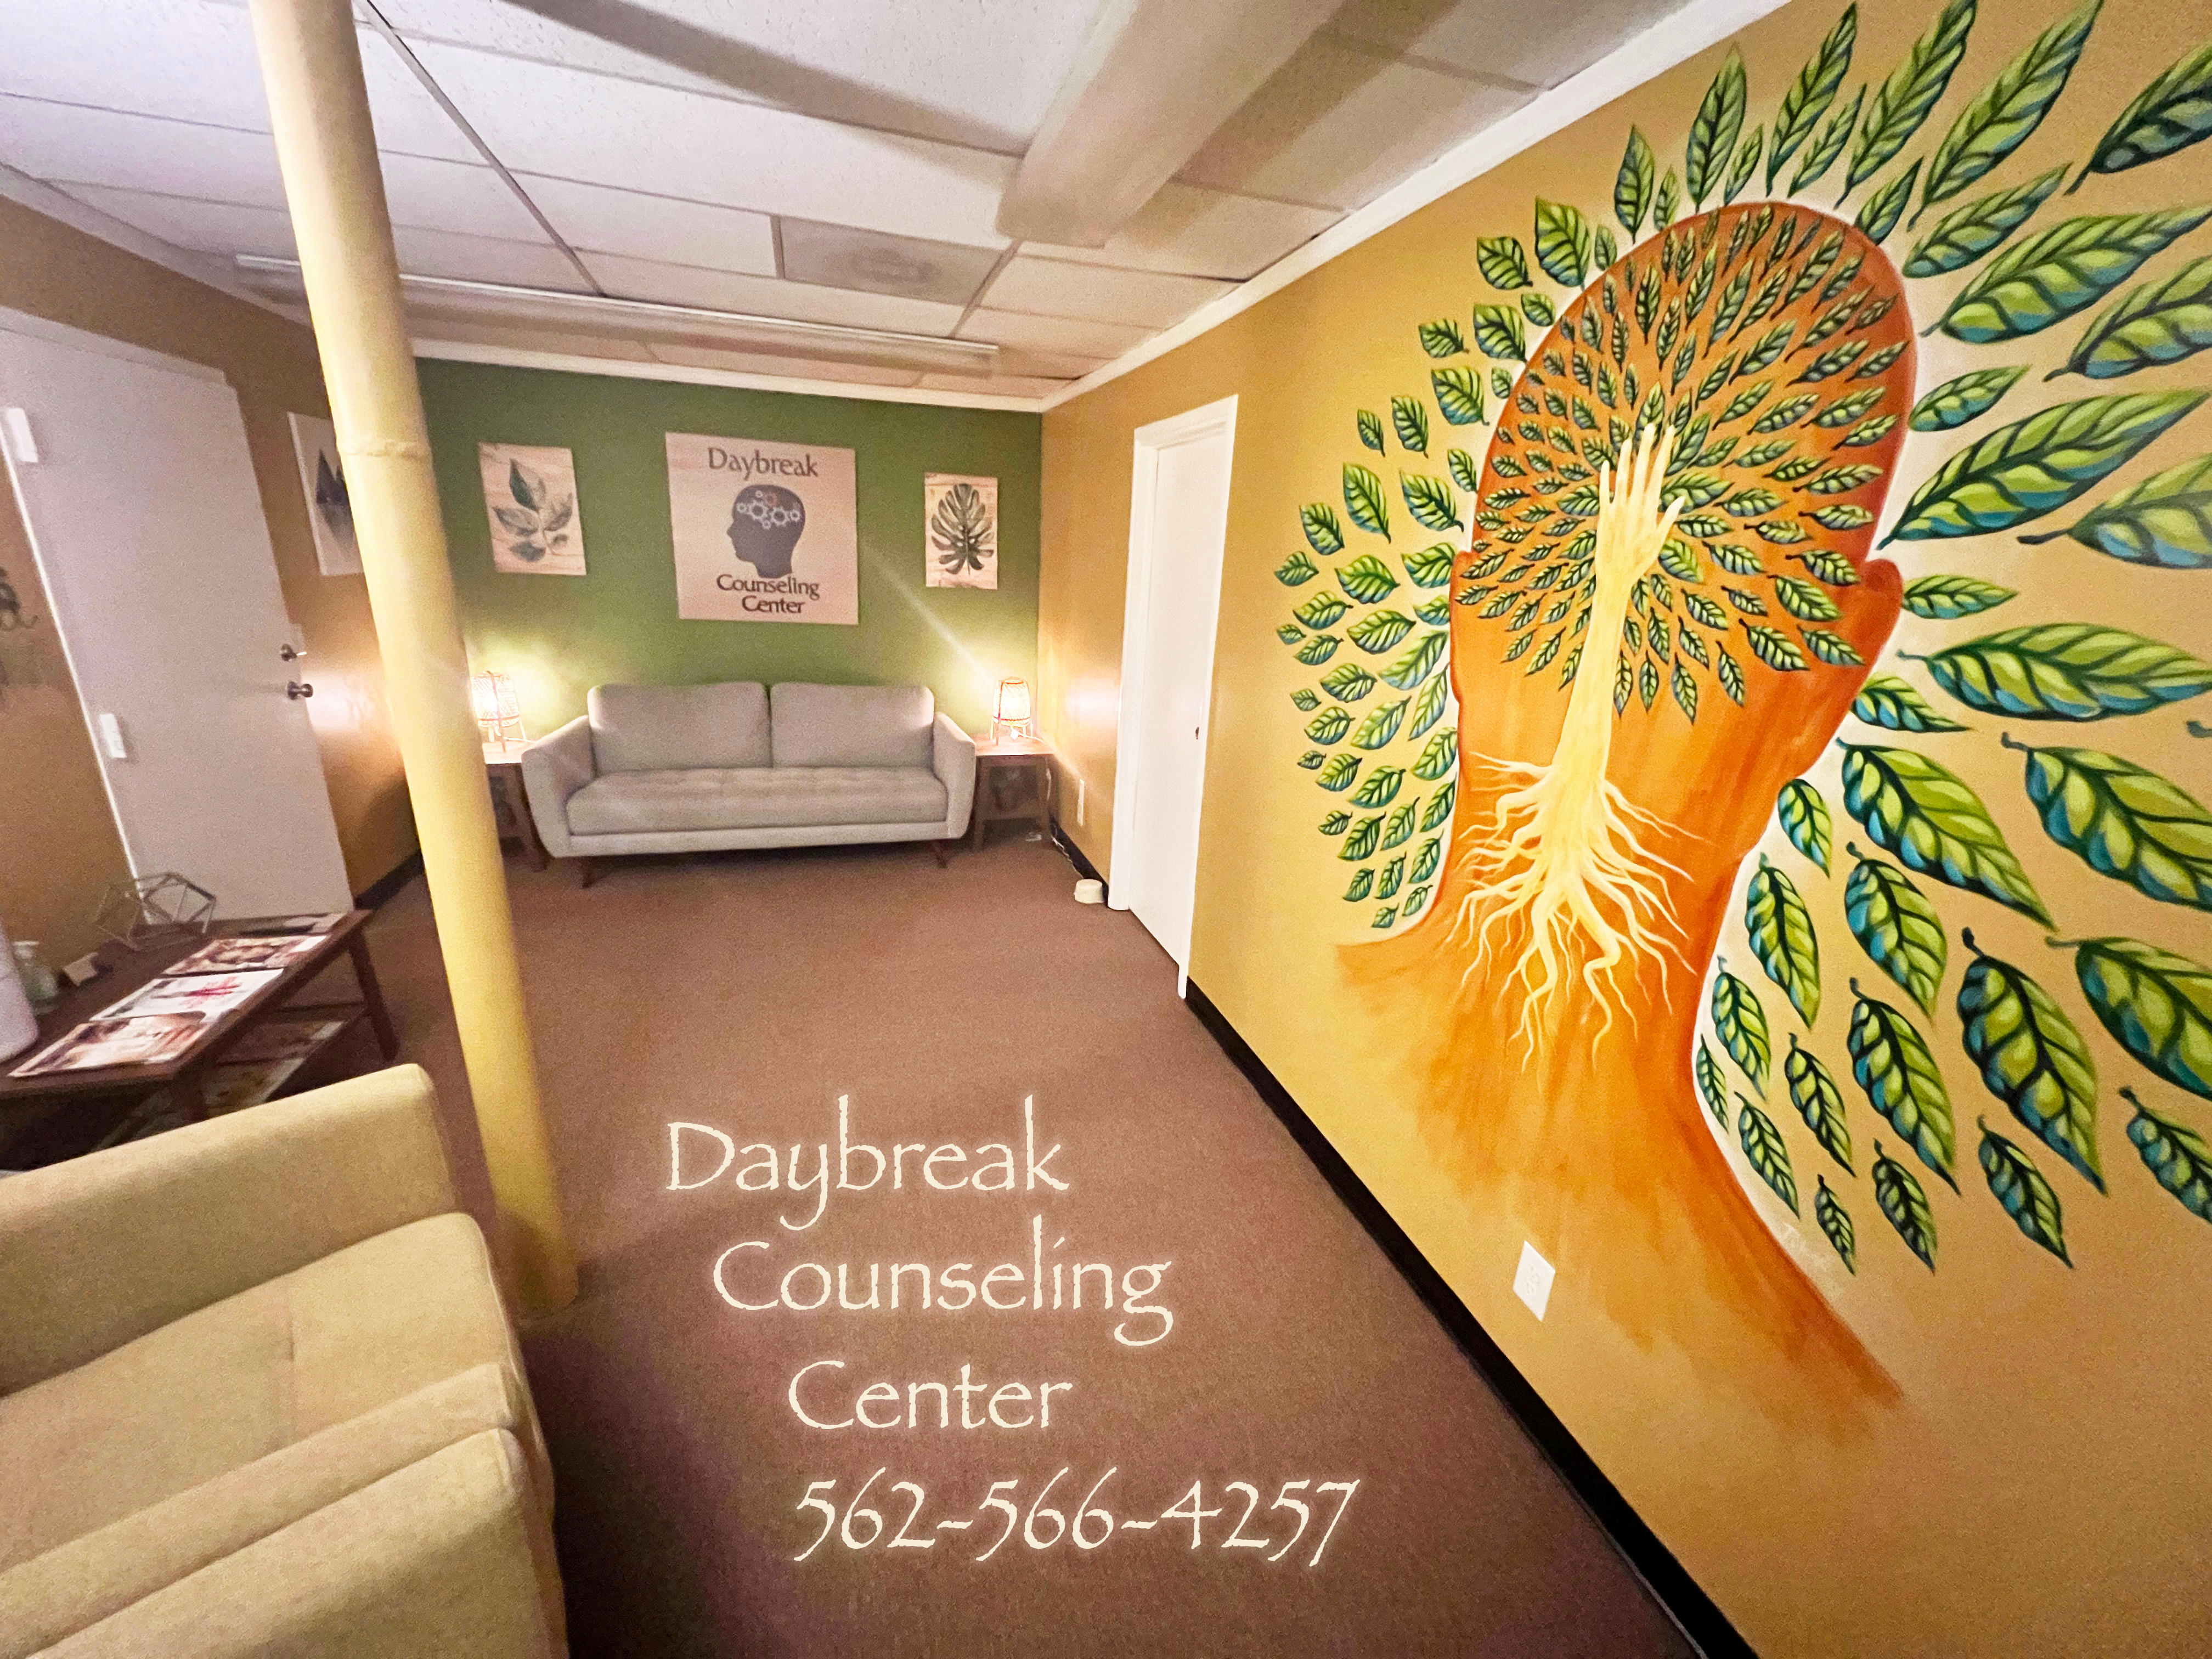 Daybreak Counseling Center Suite #201 Waiting Area